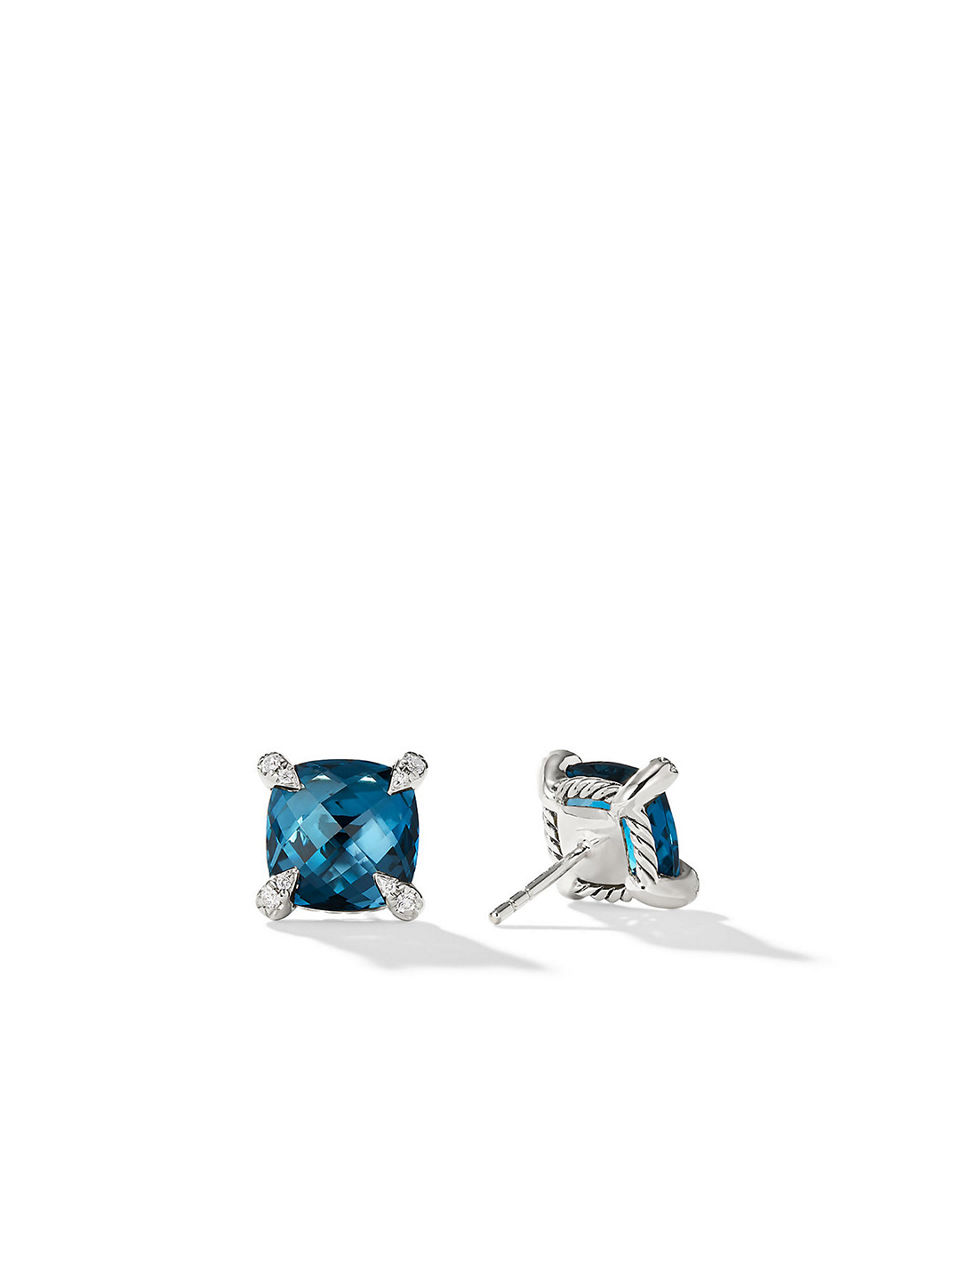 Chatelaine® Stud Earrings In Sterling Silver With Hampton Blue Topaz And Pavé Diamonds